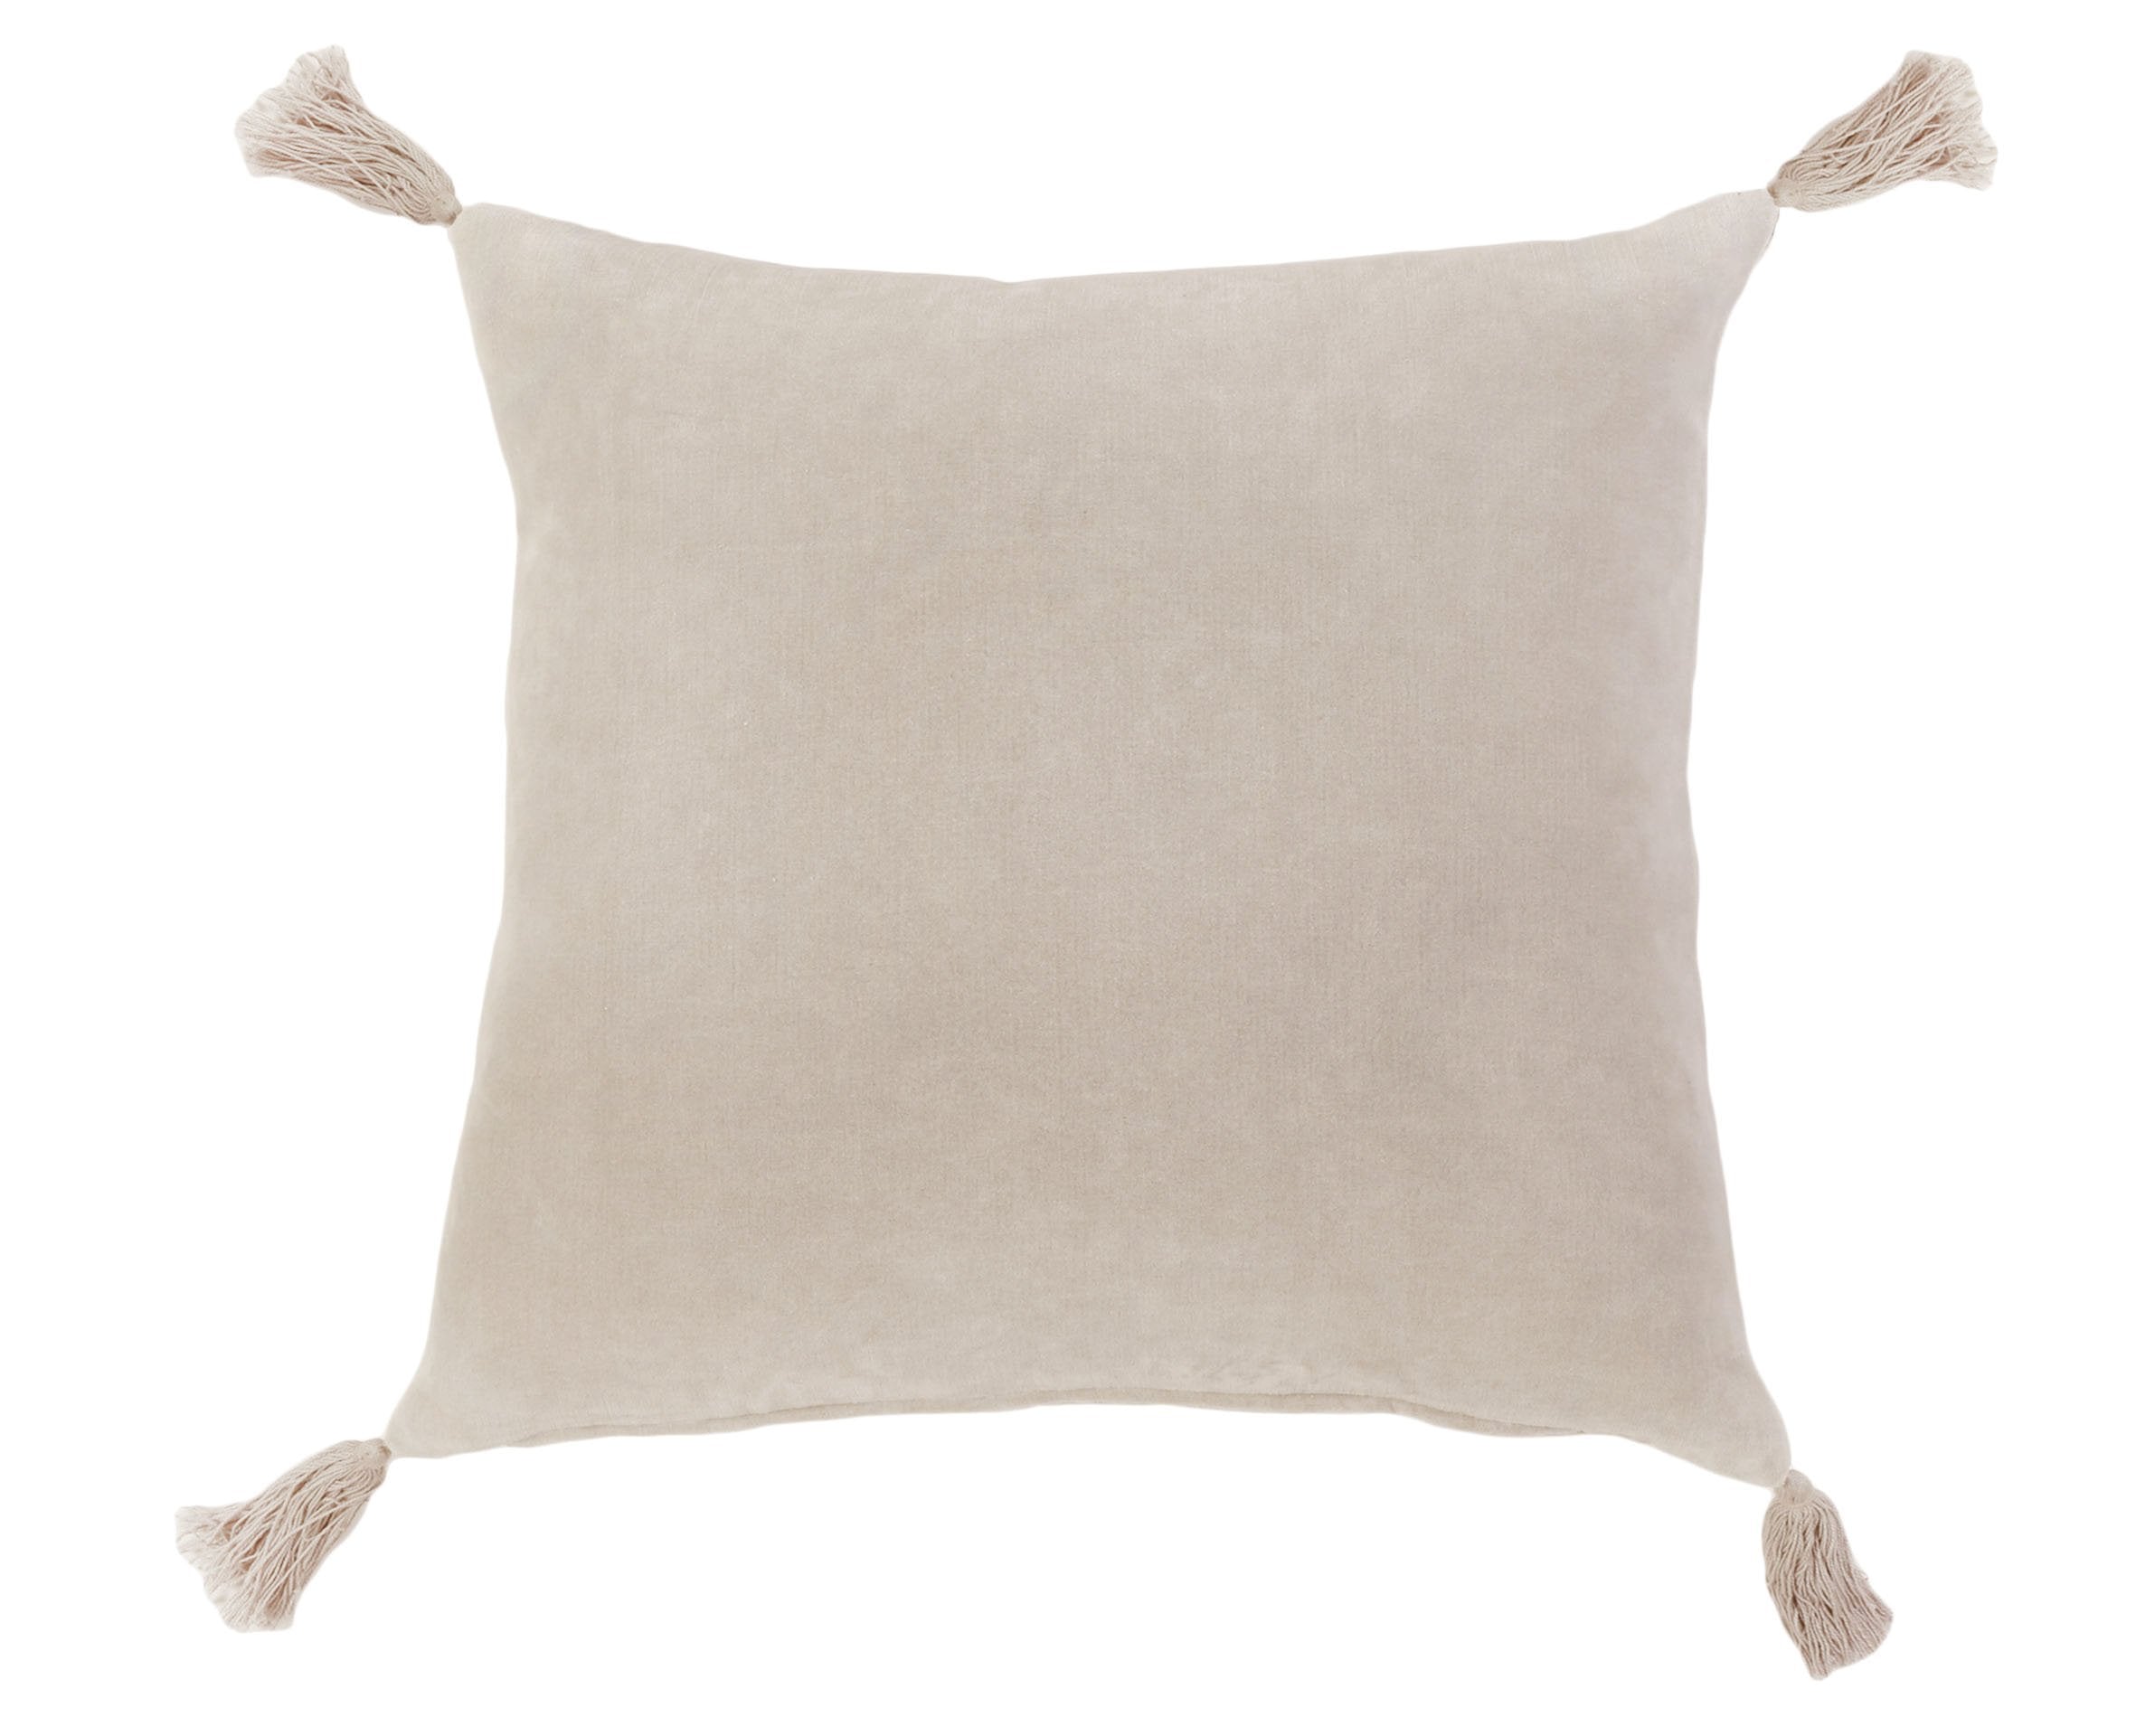 Bianca 20"x20" Pillow with Insert - 4 Colors-Pom Pom at Home